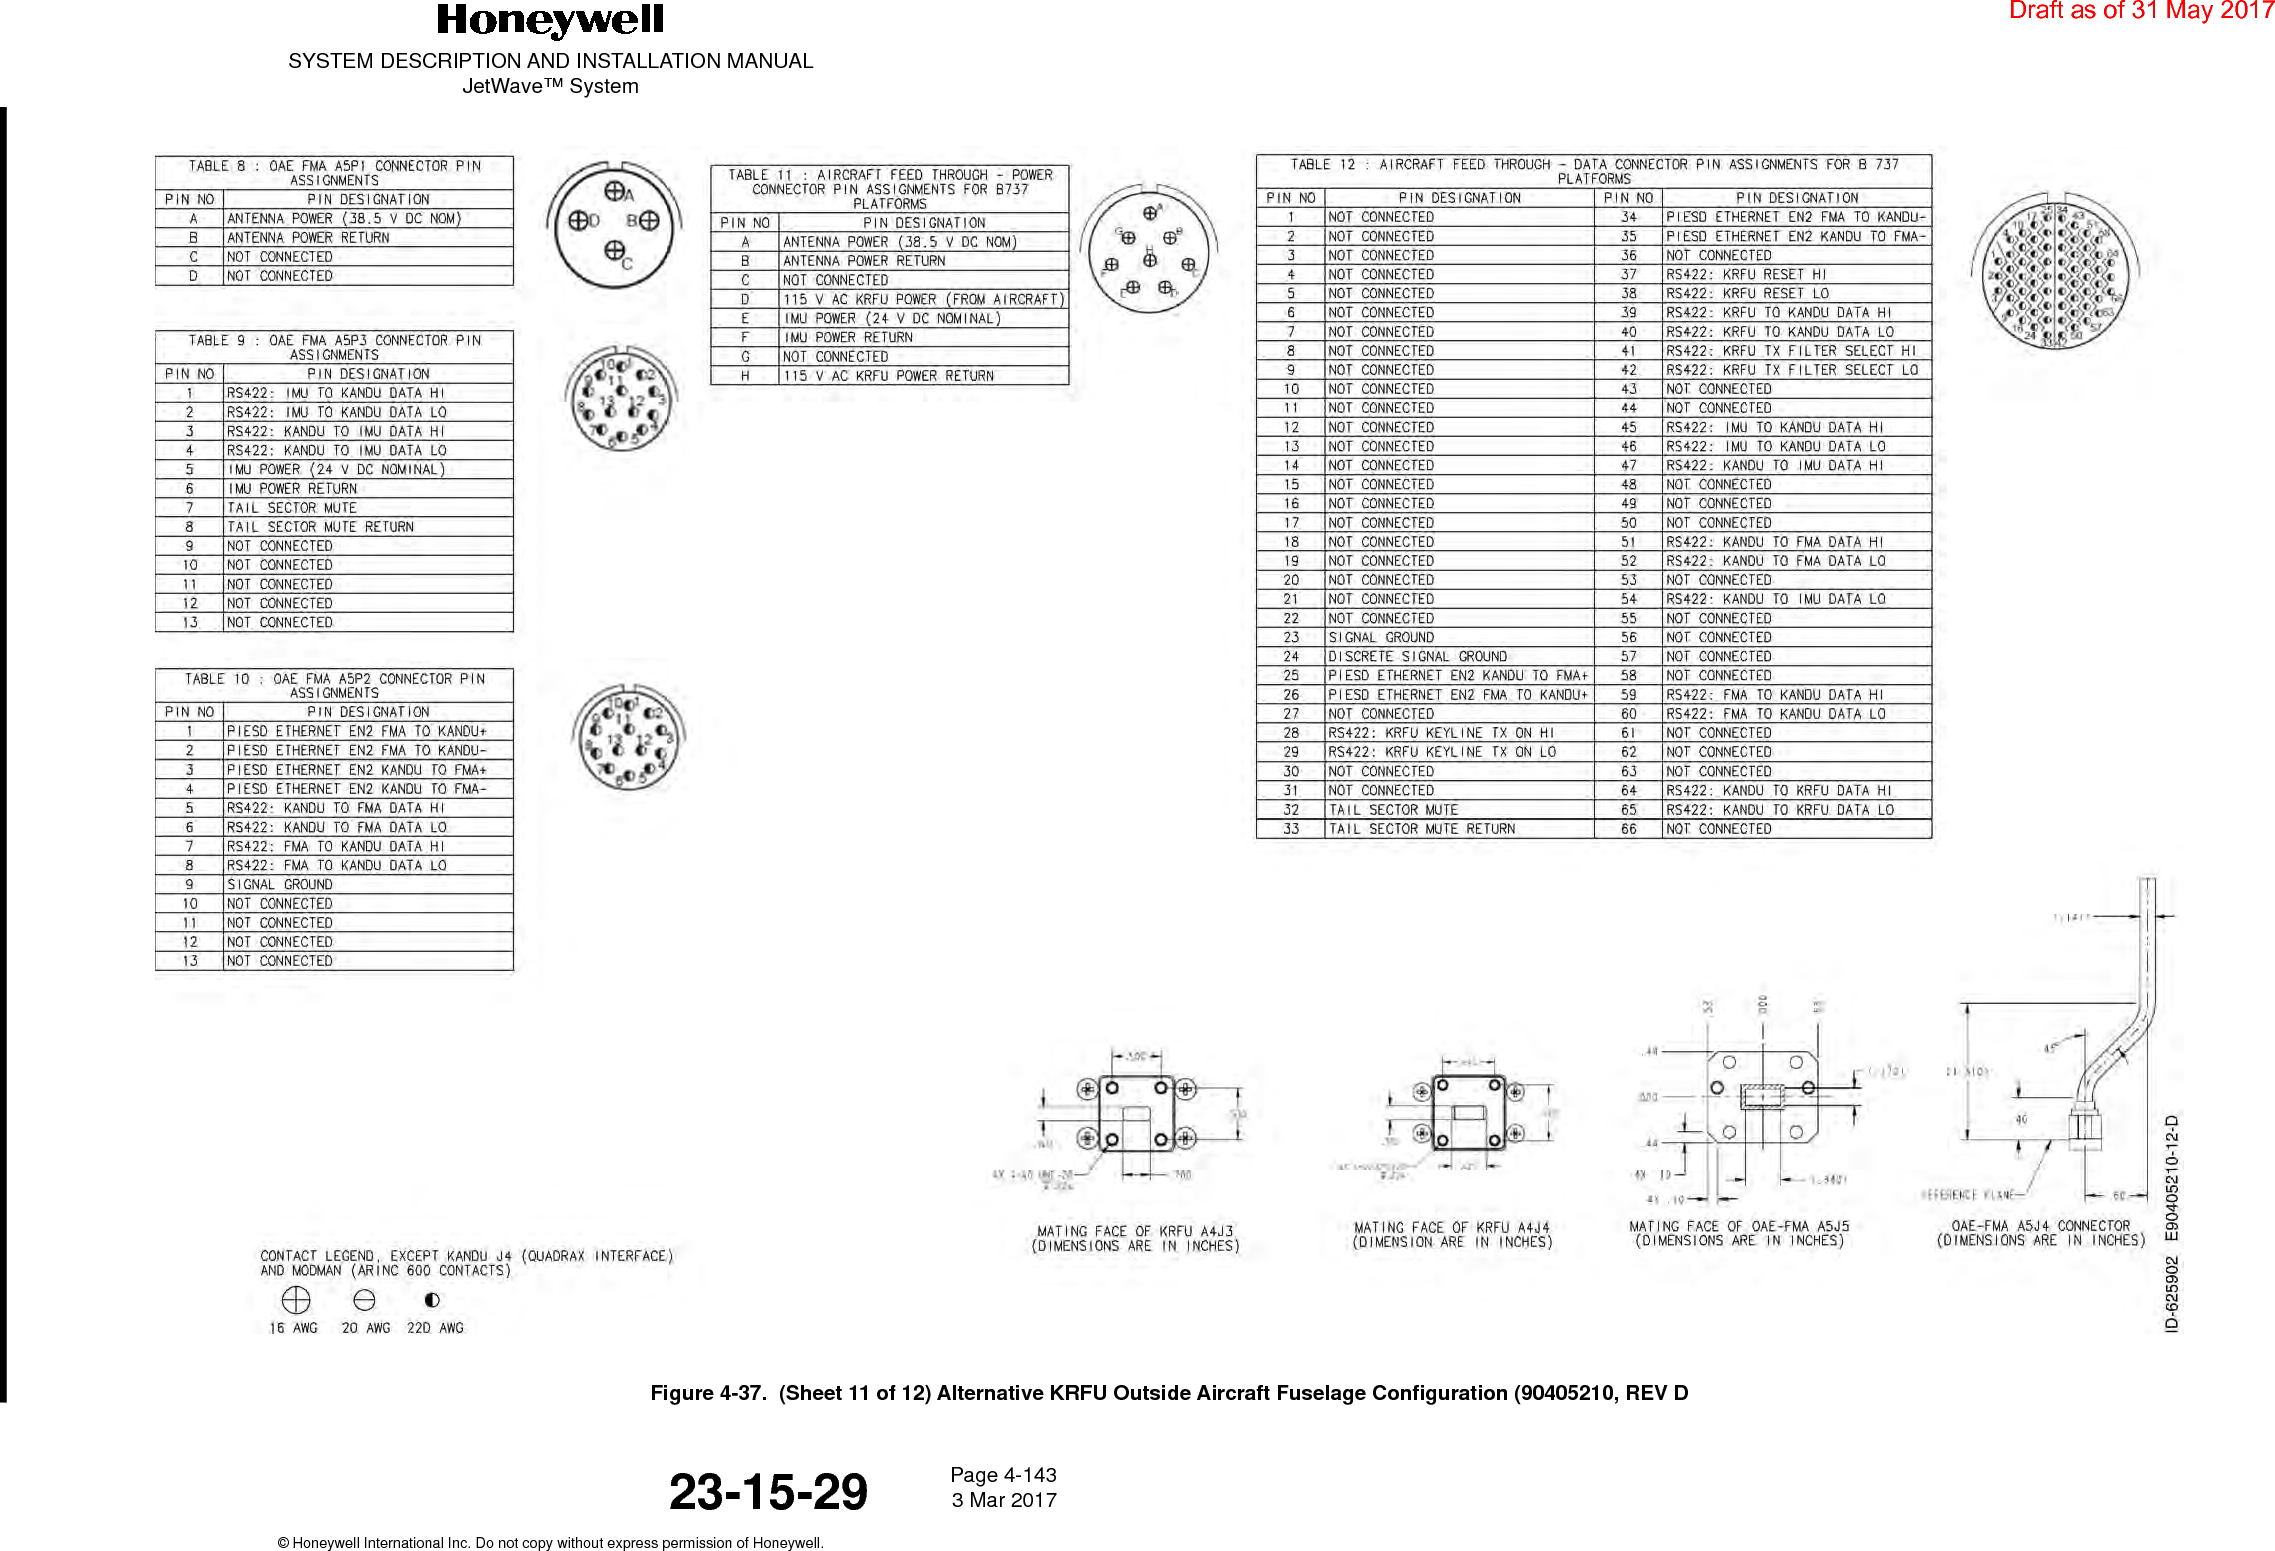 SYSTEM DESCRIPTION AND INSTALLATION MANUALJetWave™ SystemPage 4-143 3 Mar 2017© Honeywell International Inc. Do not copy without express permission of Honeywell.23-15-29Figure 4-37.  (Sheet 11 of 12) Alternative KRFU Outside Aircraft Fuselage Configuration (90405210, REV DDraft as of 31 May 2017